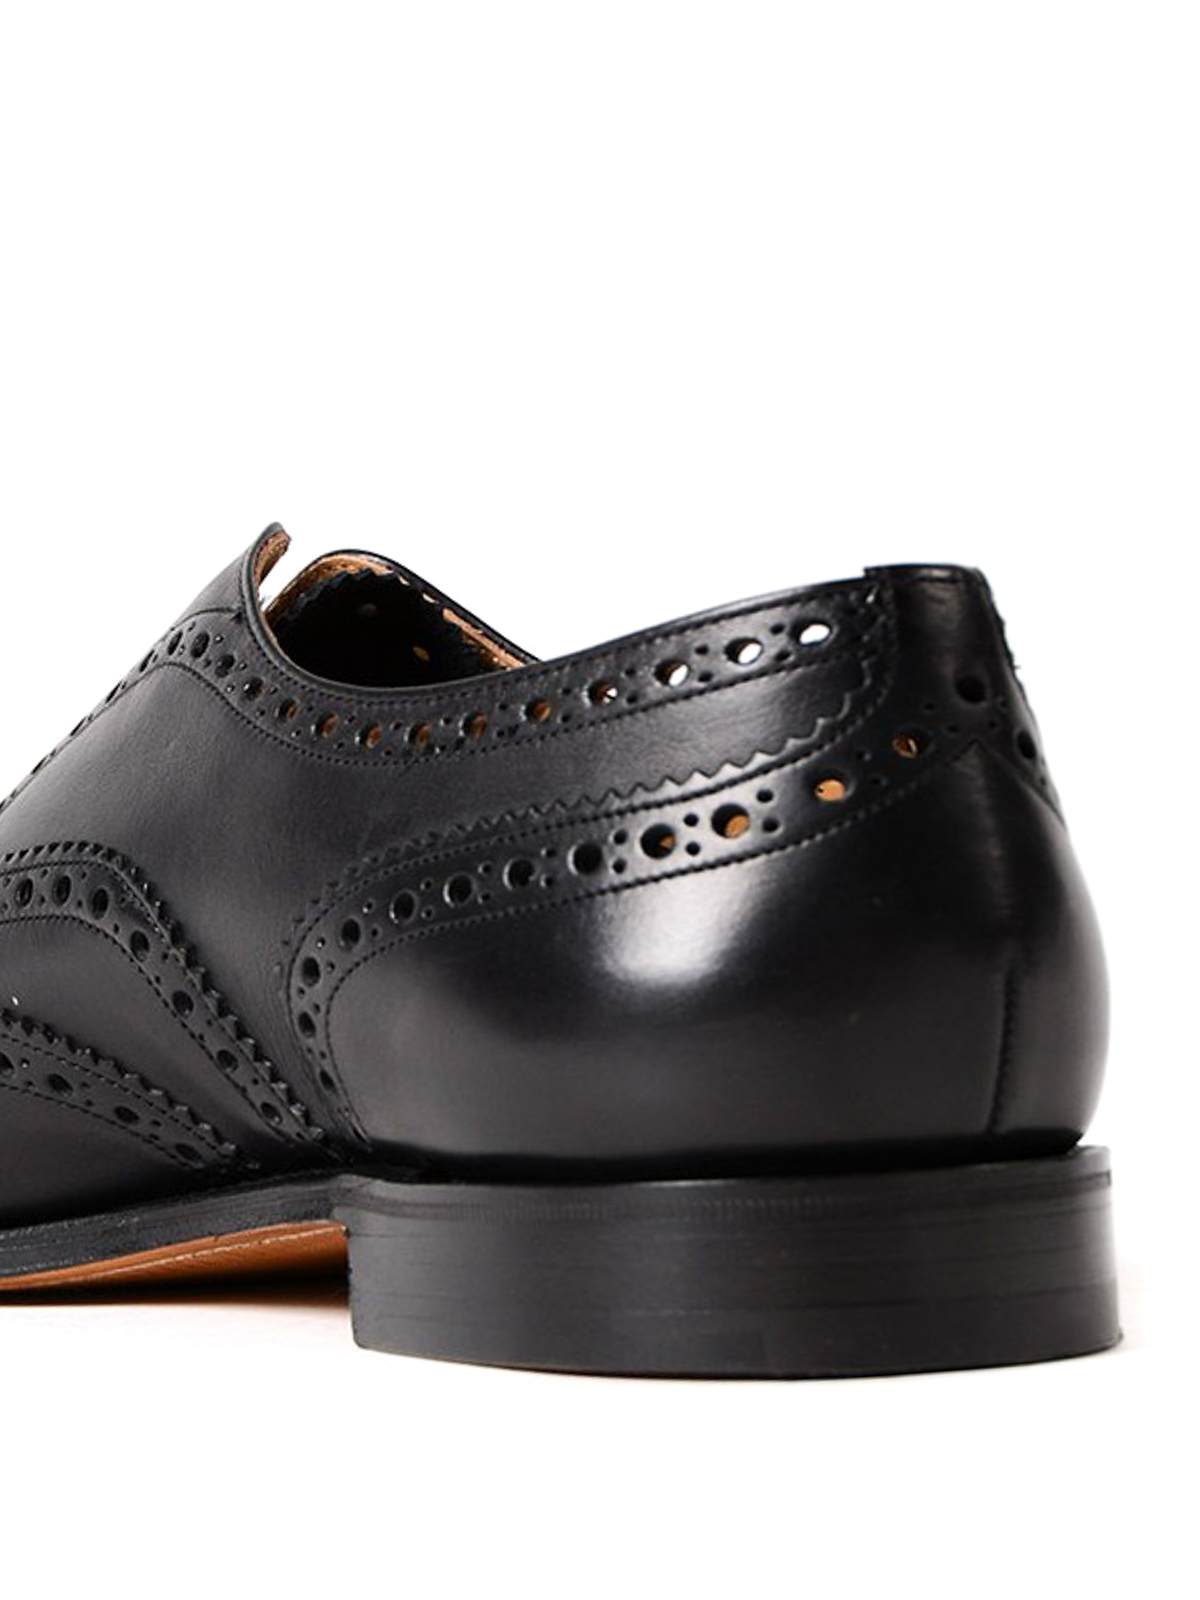 Church's Leather BURWOOD Brogue Derby Shoes men - Glamood Outlet